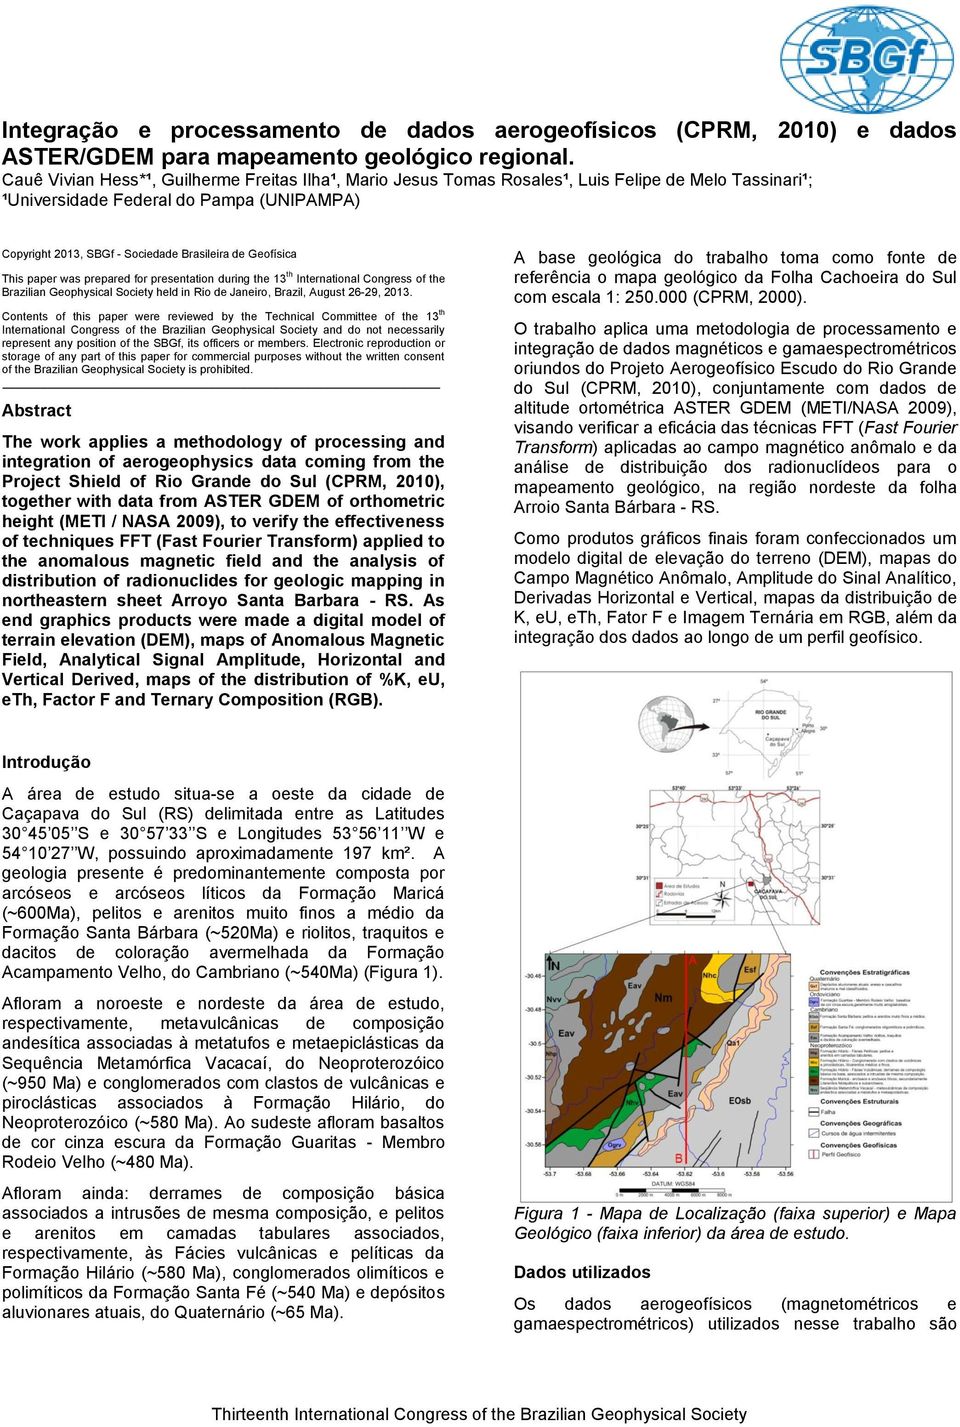 Geofísica This paper was prepared for presentation during the 13 th International Congress of the Brazilian Geophysical Society held in Rio de Janeiro, Brazil, August 6-9, 013.